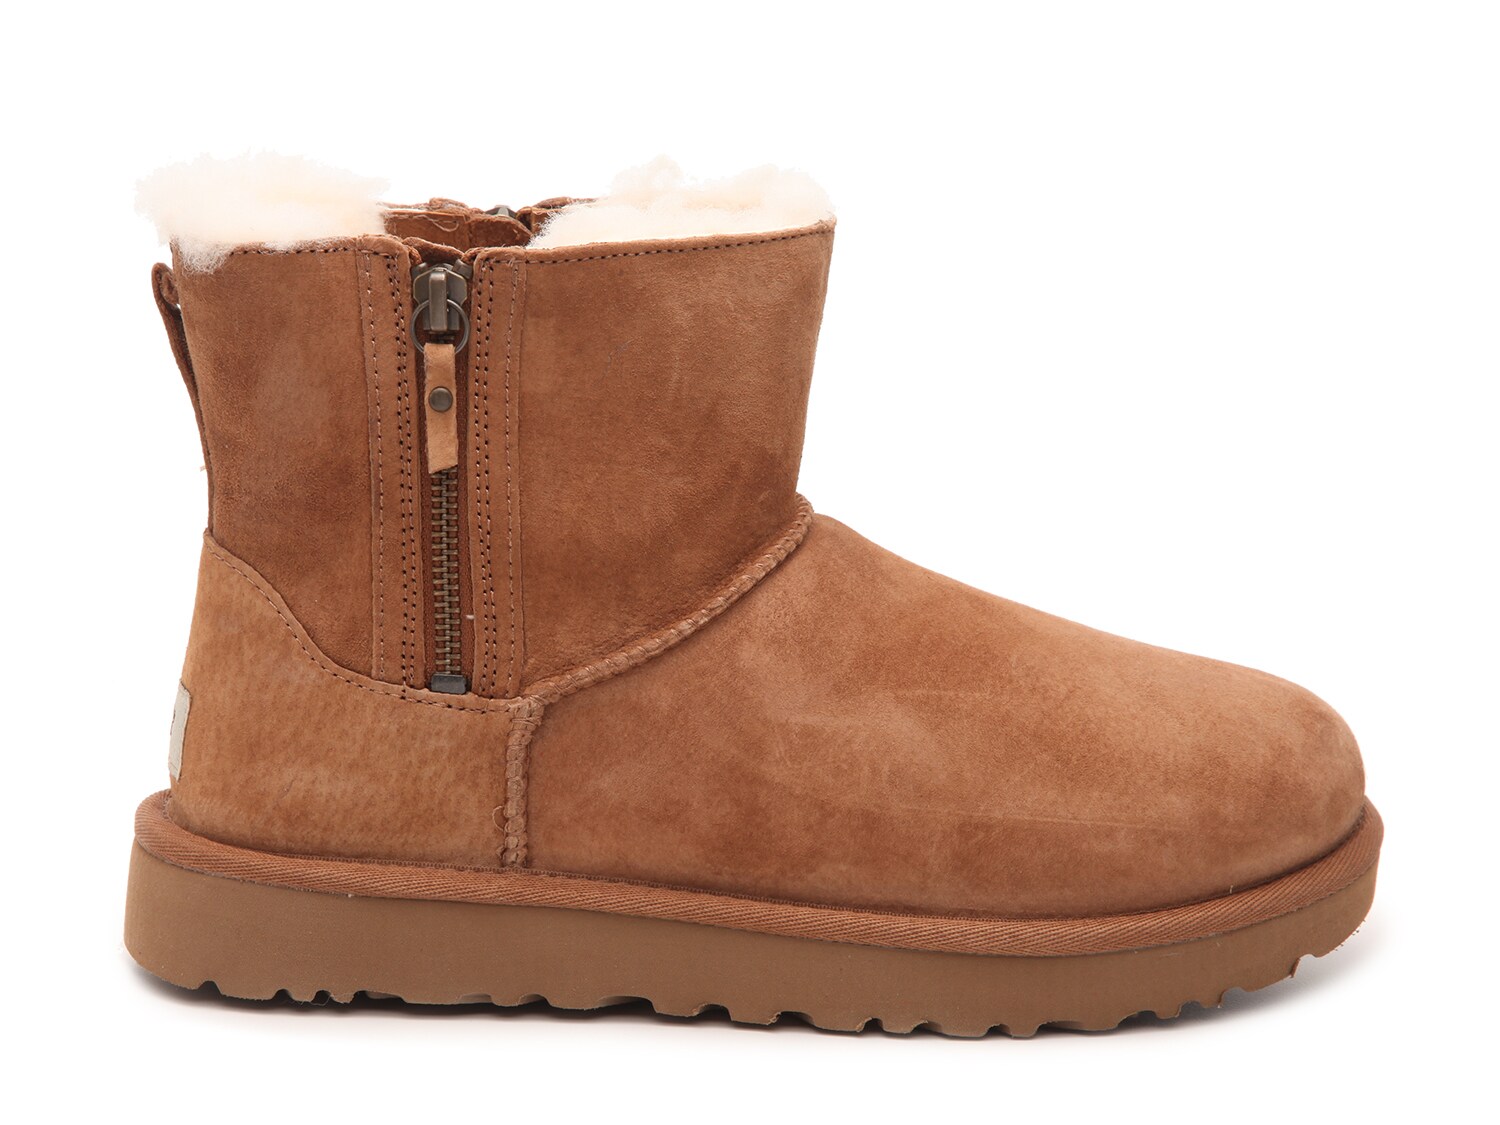 ugg boots dsw Cheaper Than Retail Price 